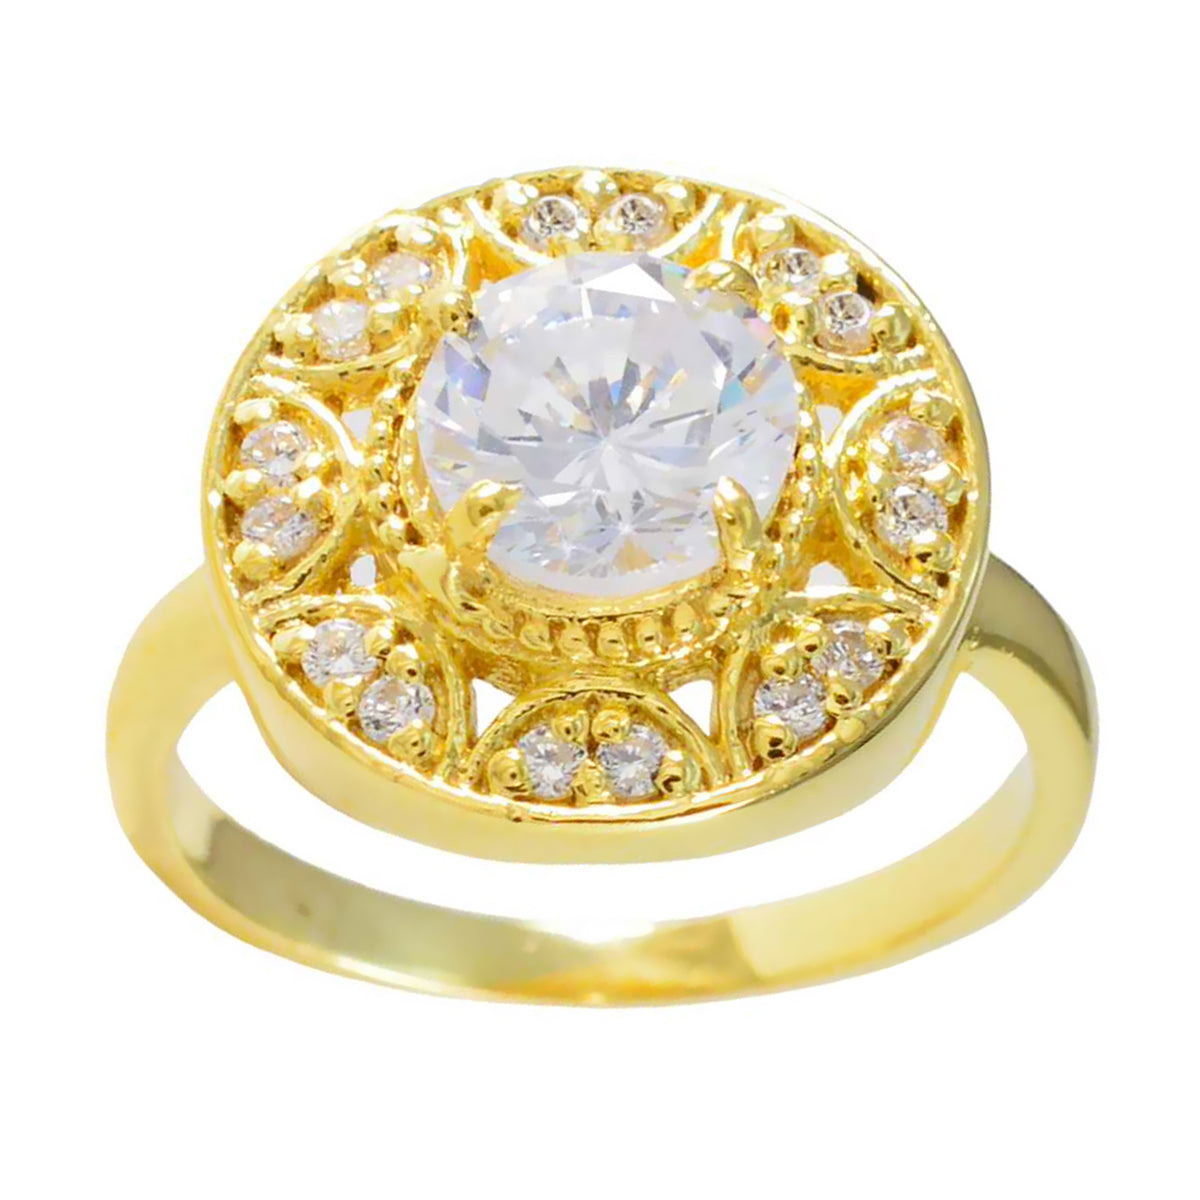 Riyo Wholesale Silver Ring With Yellow Gold Plating White CZ Stone Round Shape Prong Setting Designer Jewelry Thanksgiving Ring